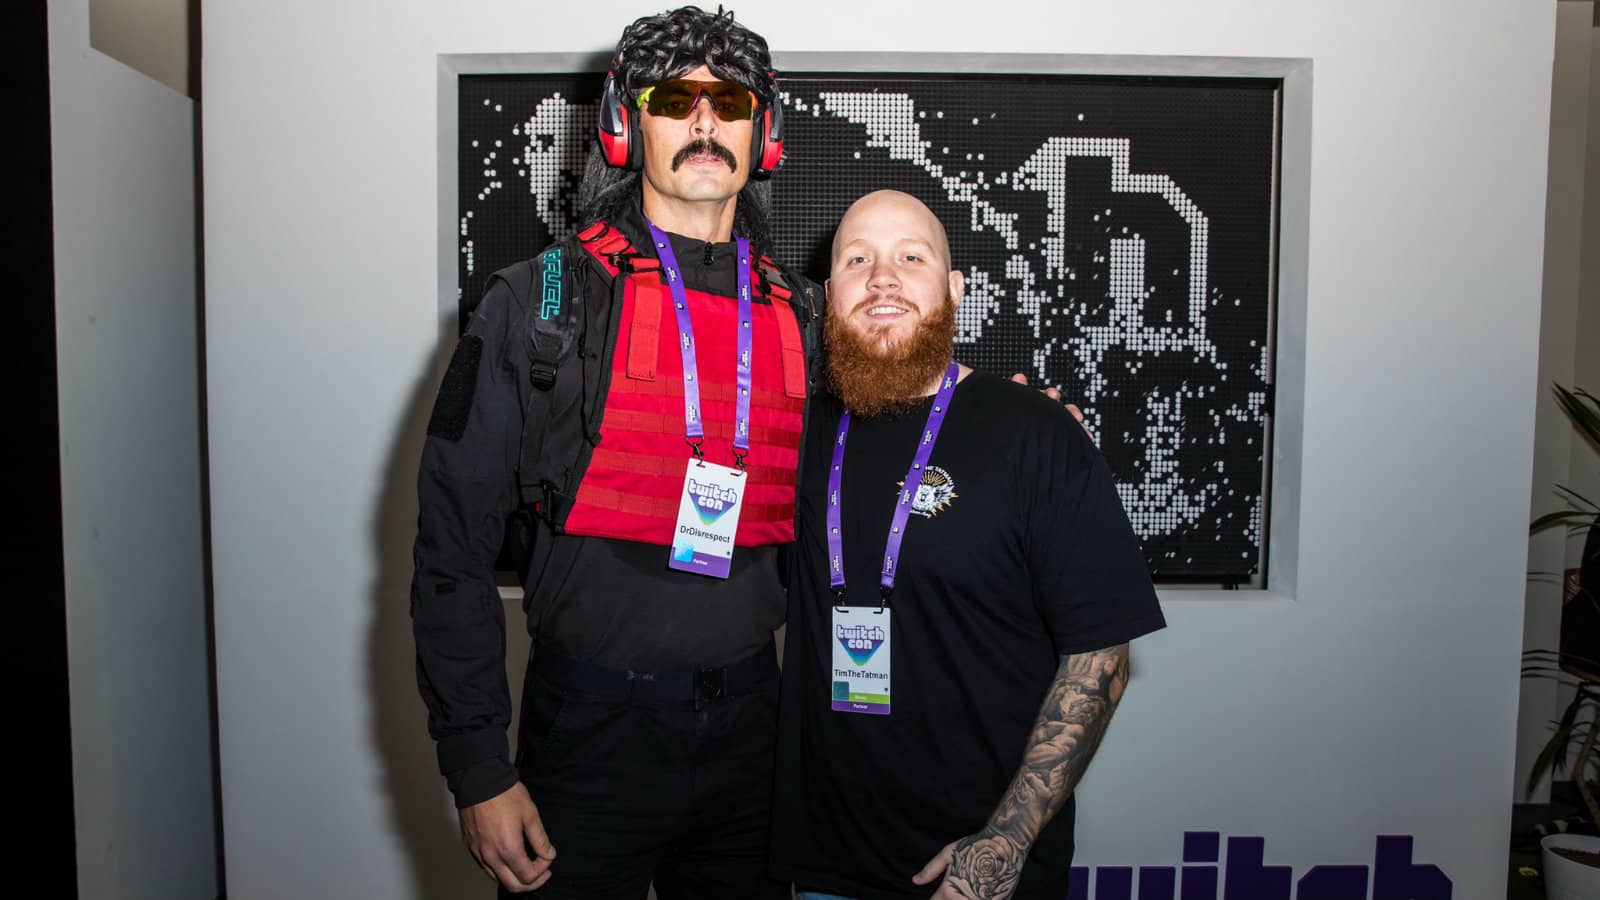 TimTheTatman poses with Dr Disrespect